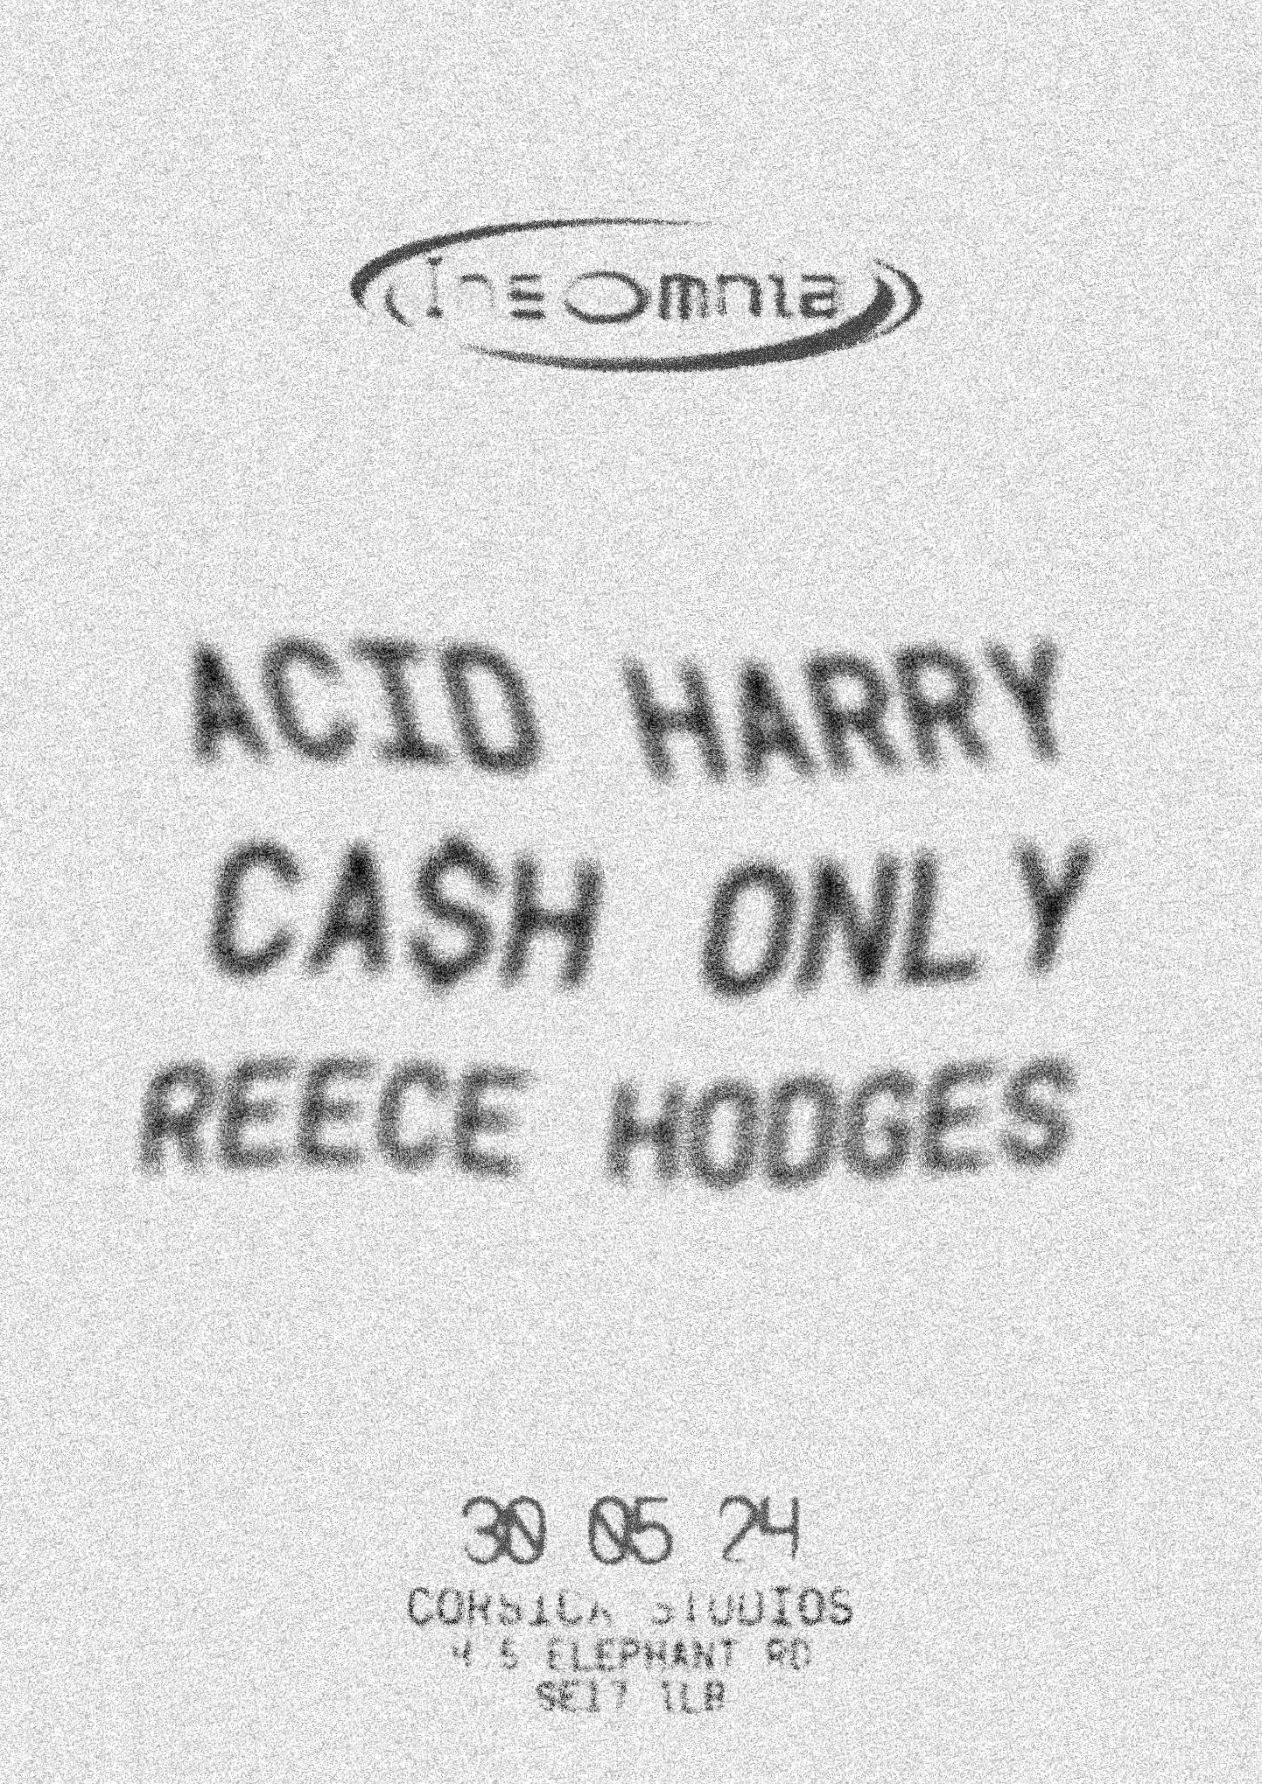 Insomnia London: ACID HARRY, CA$H ONLY, Reece Hodges - フライヤー表